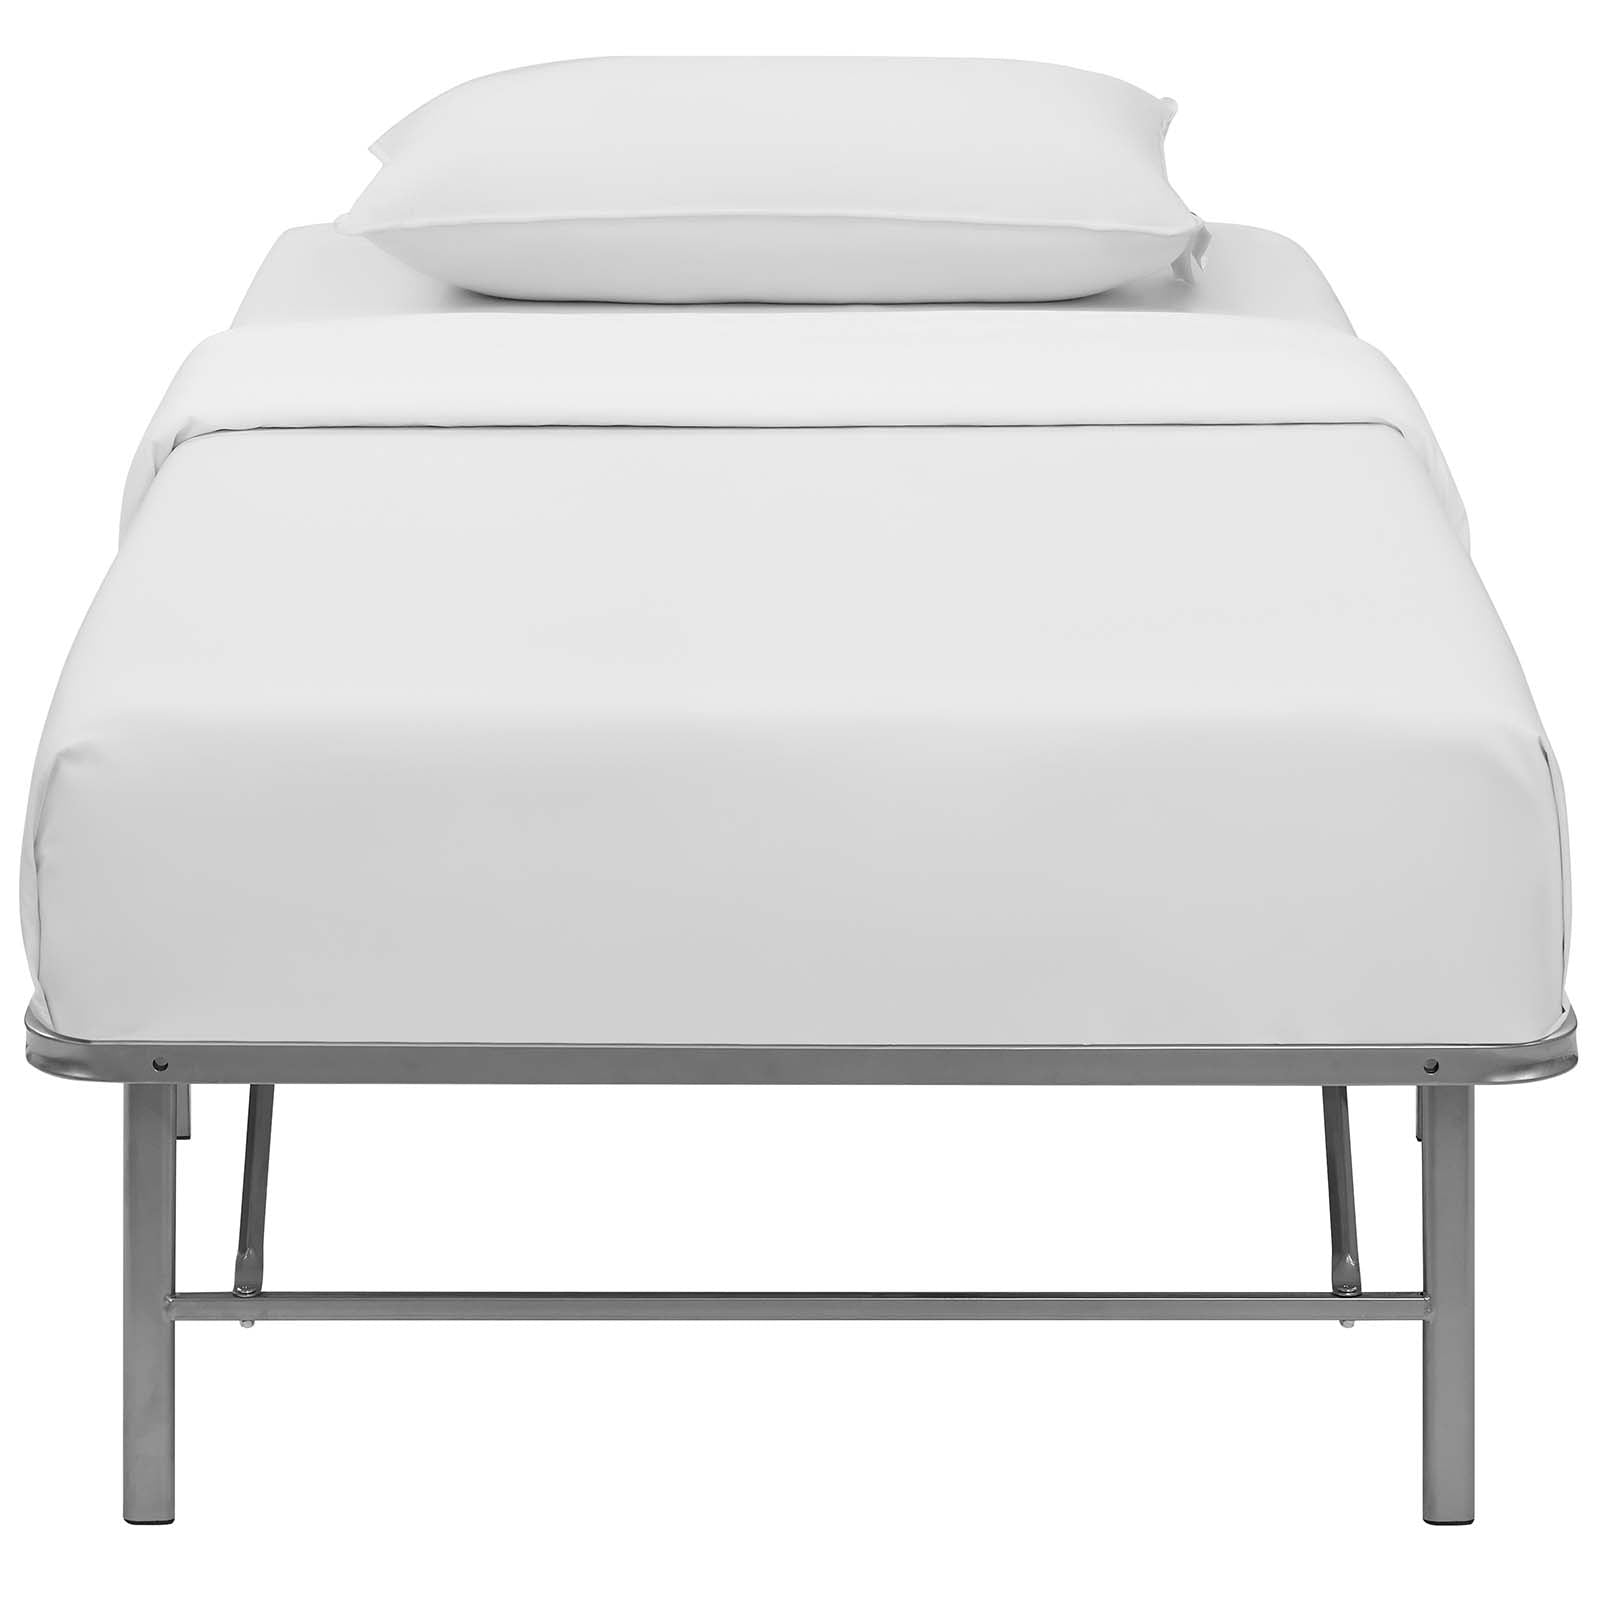 Horizon Twin Stainless Steel Bed Frame - East Shore Modern Home Furnishings